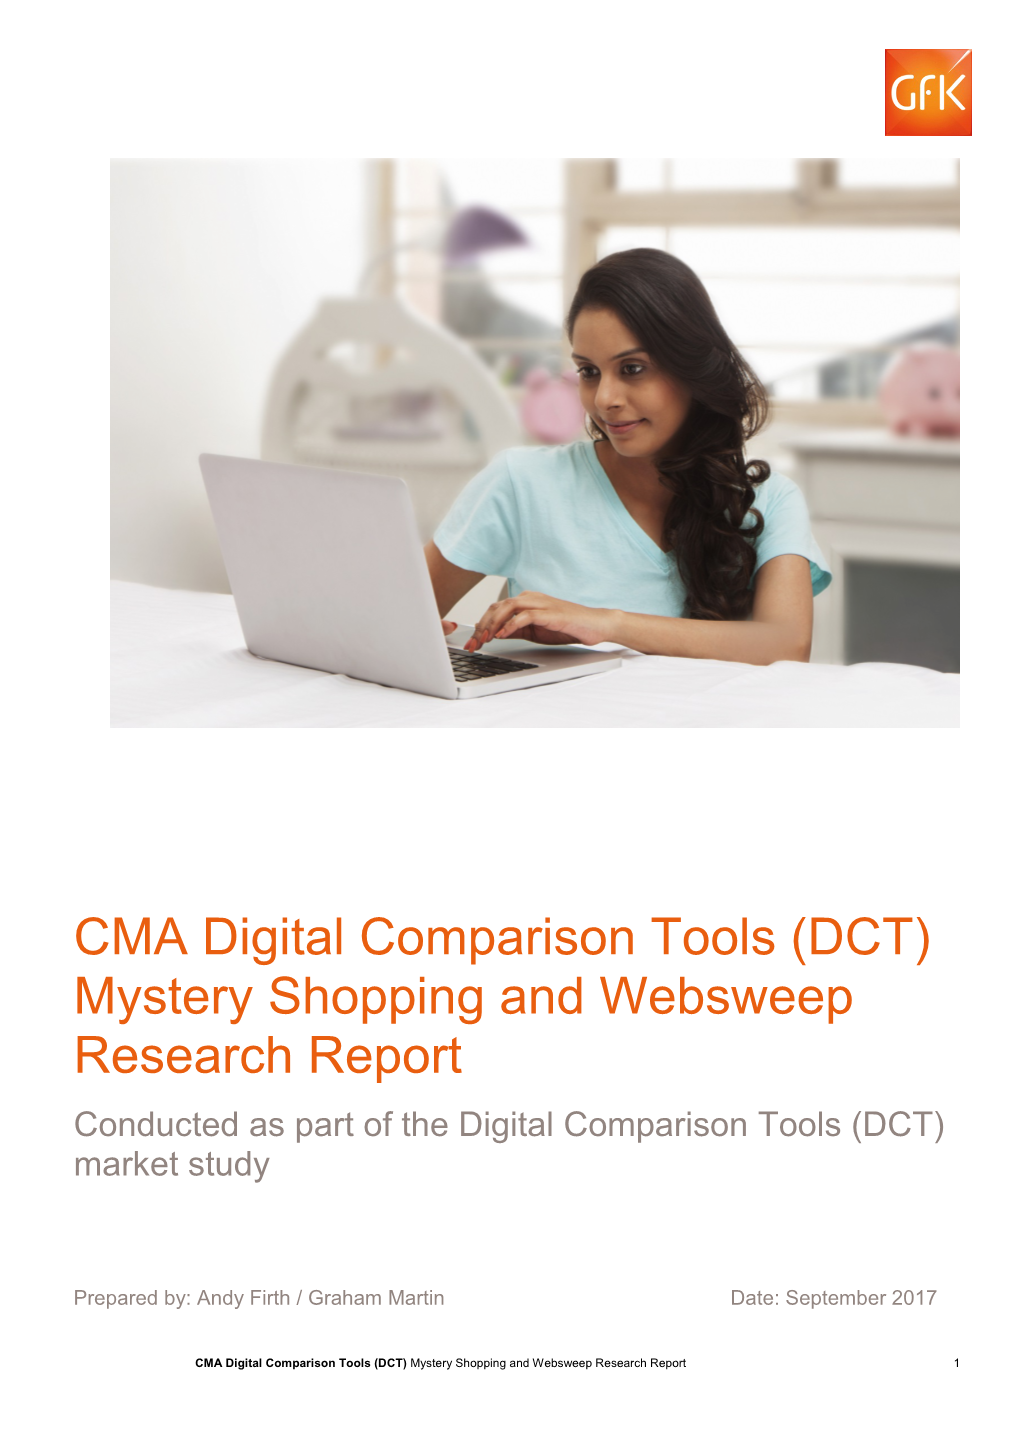 CMA Digital Comparison Tools (DCT) Mystery Shopping and Websweep Research Report Conducted As Part of the Digital Comparison Tools (DCT) Market Study